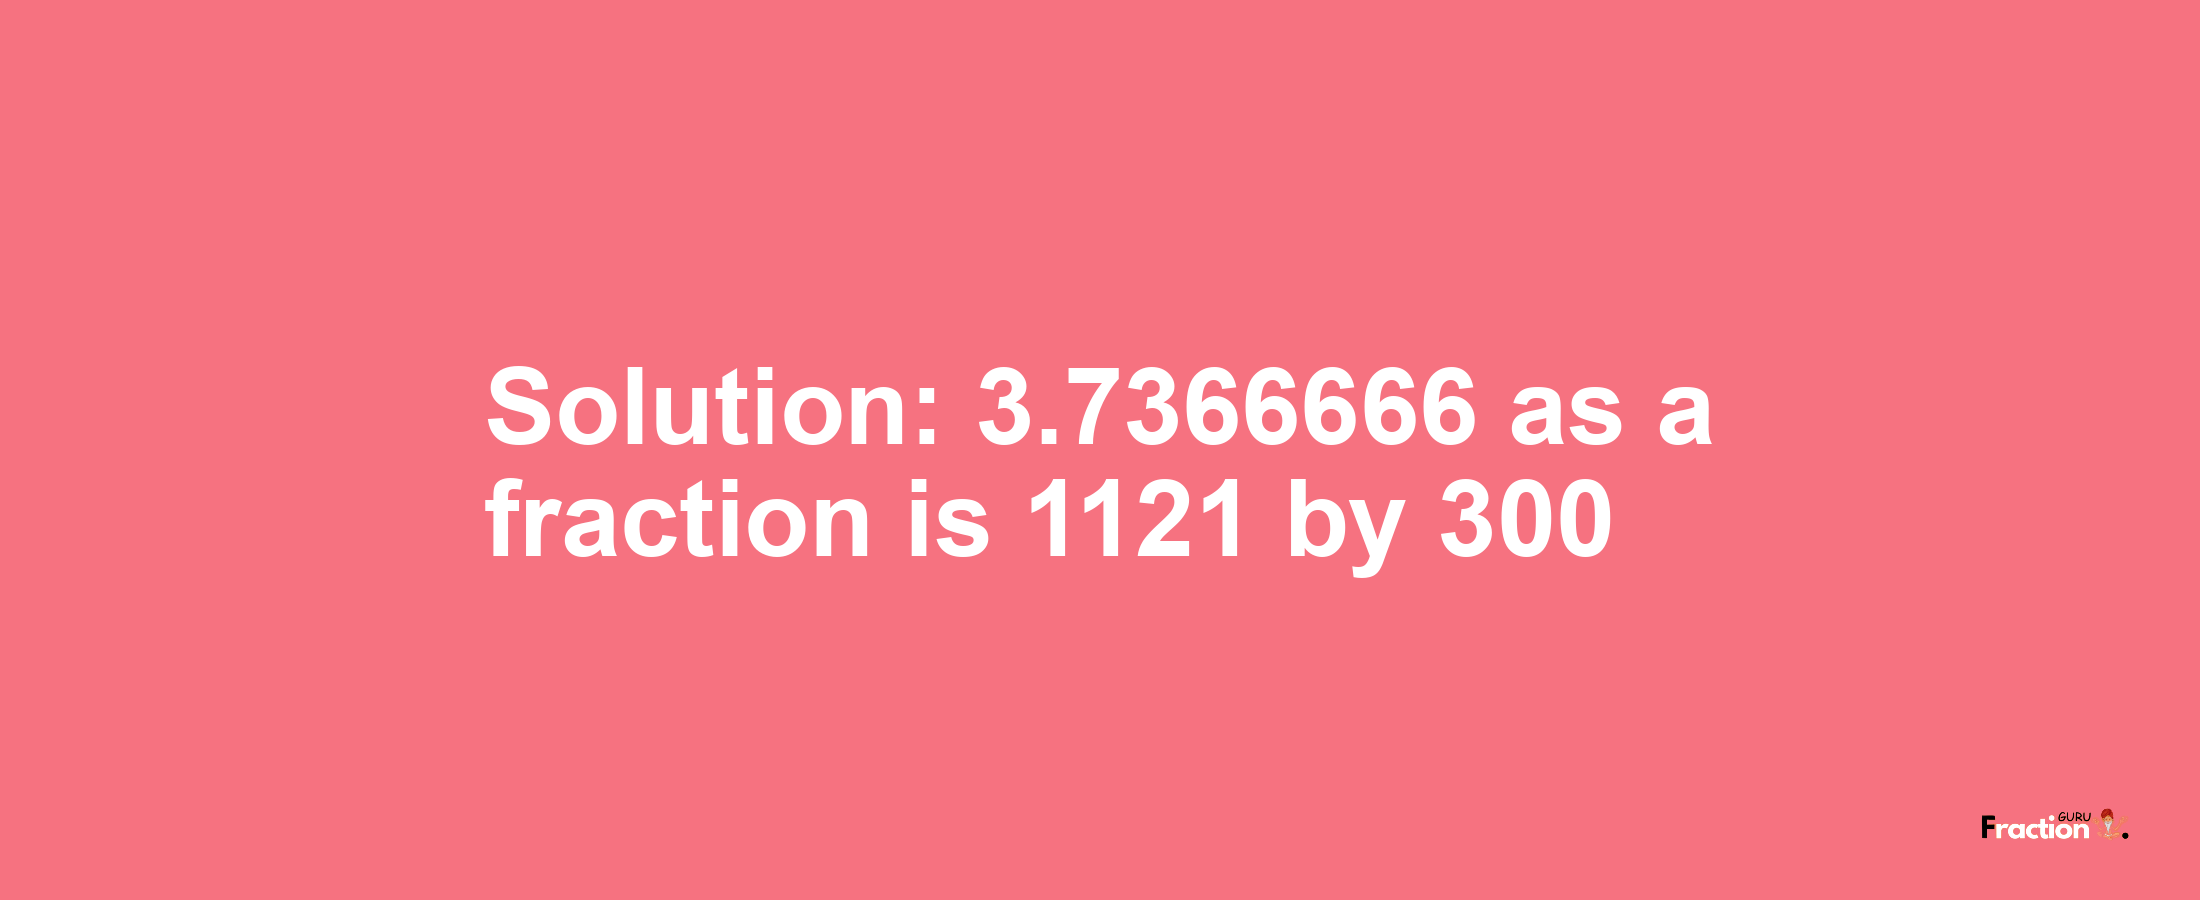 Solution:3.7366666 as a fraction is 1121/300